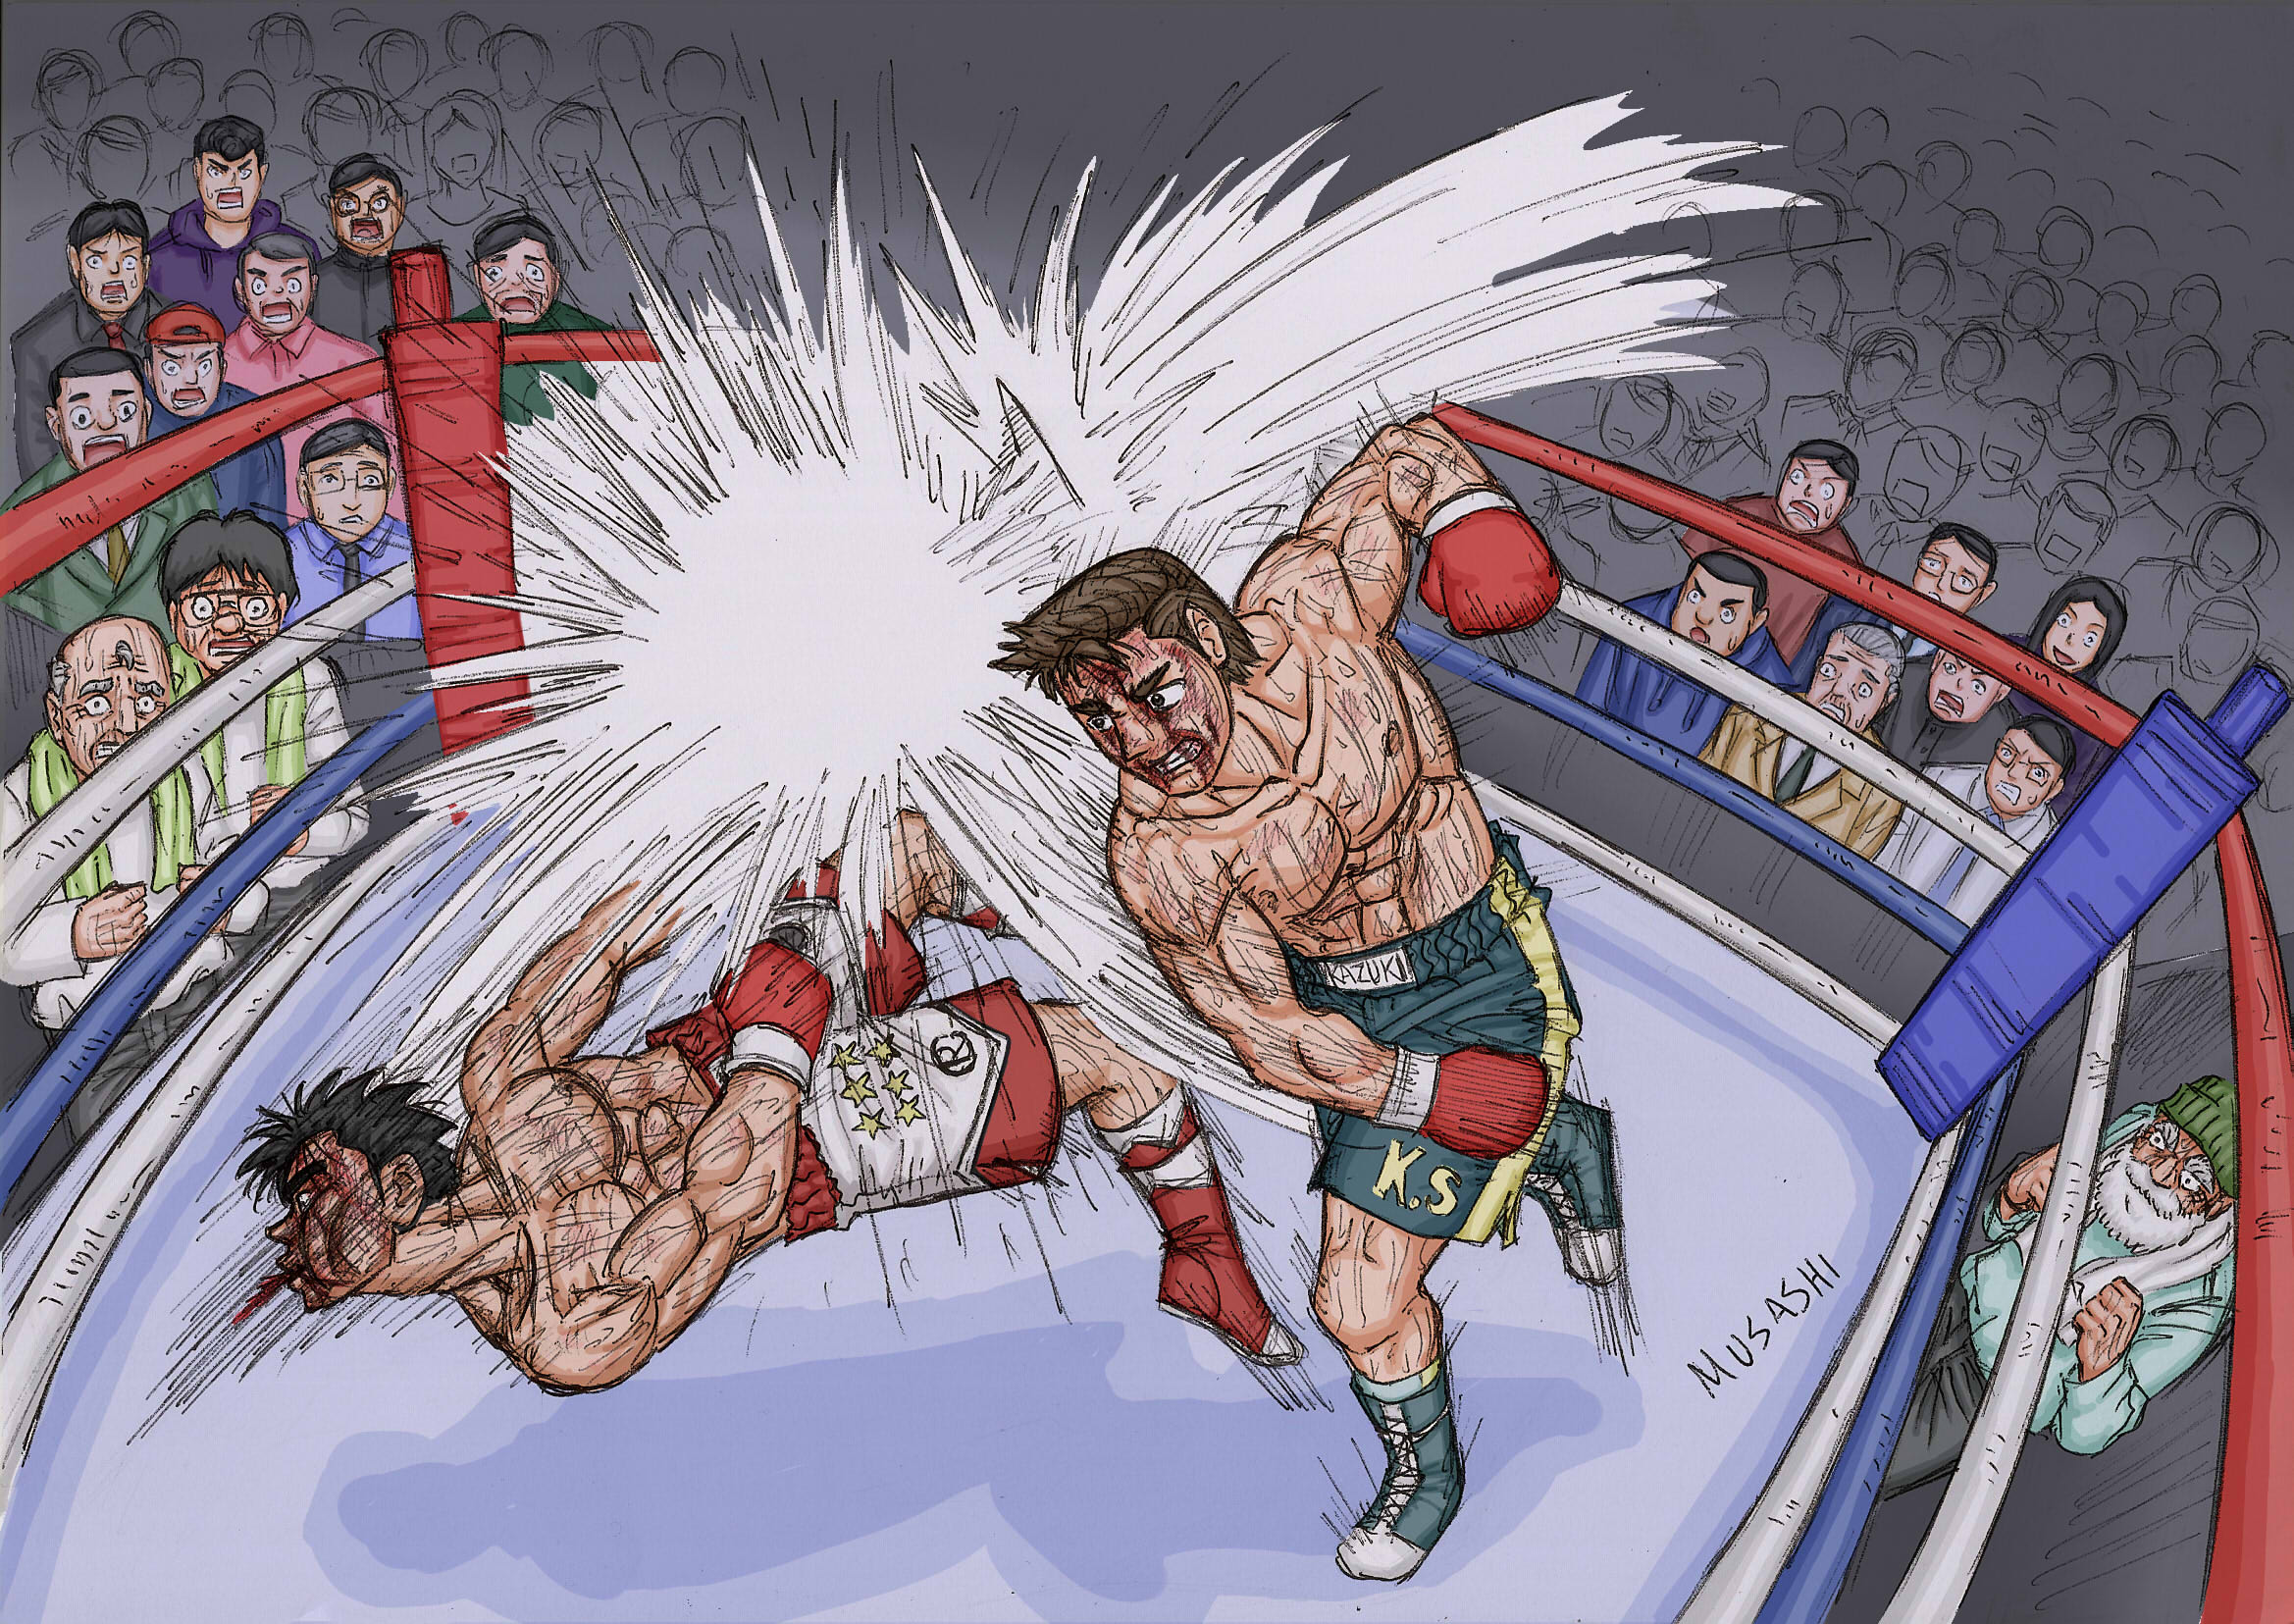 After Work - Ippo by XiionXII on DeviantArt